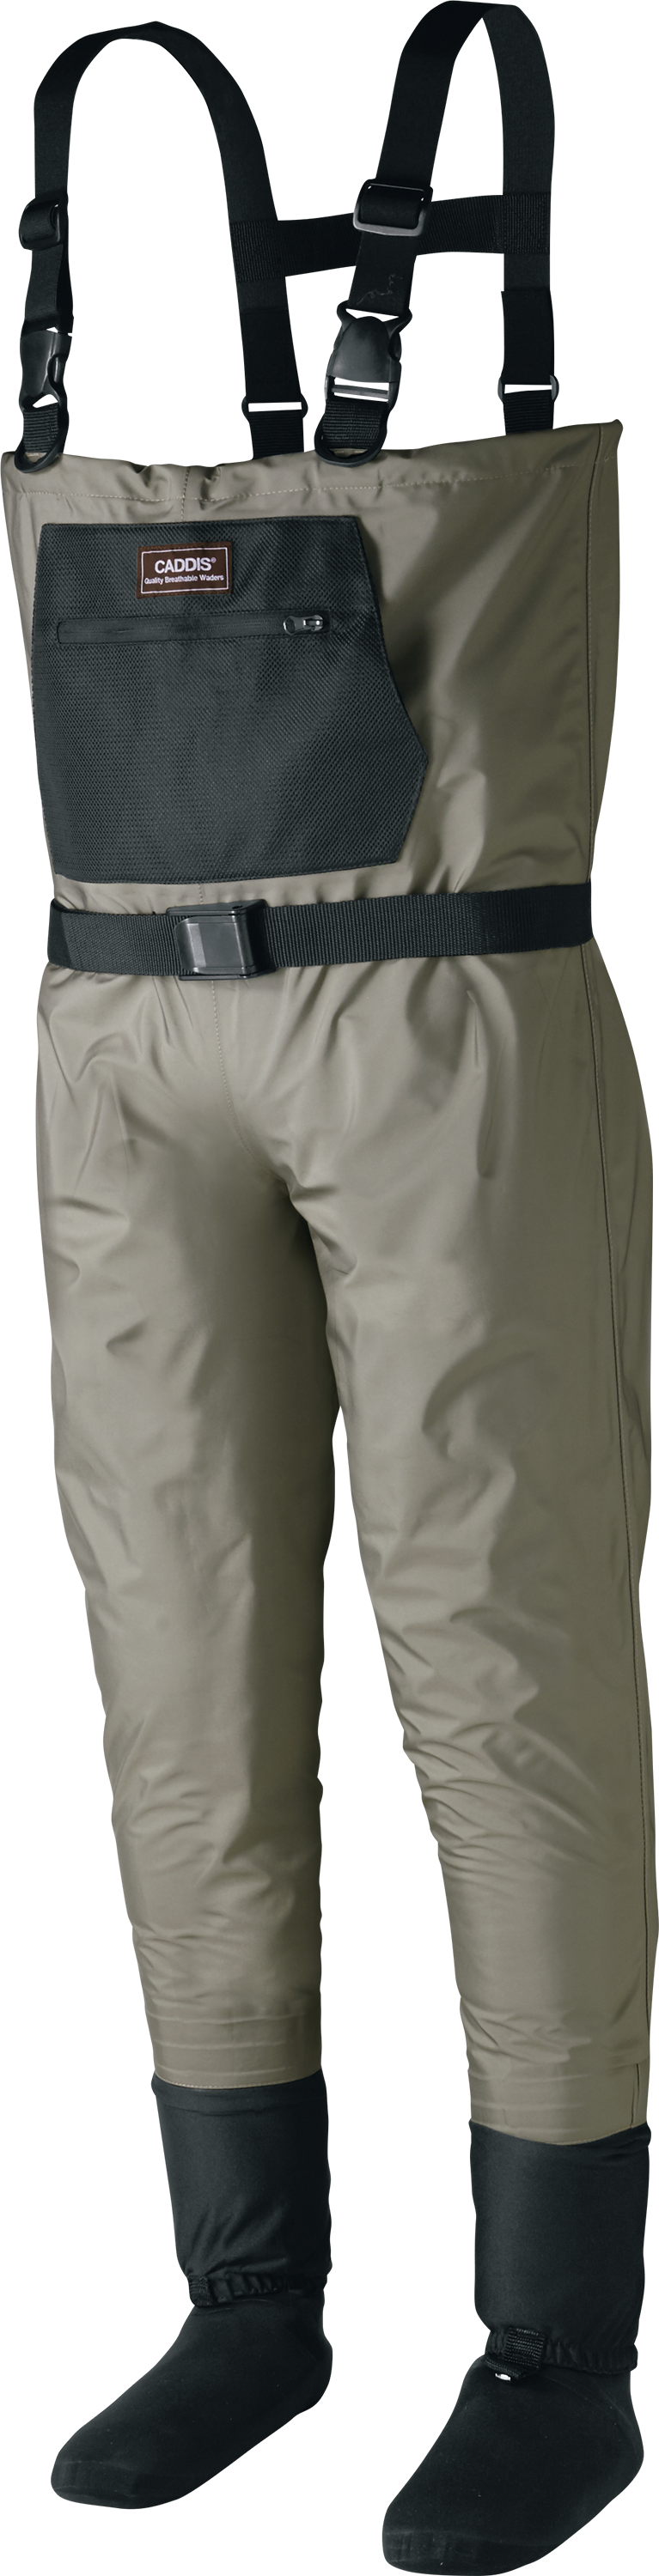 Caddis Breathable Stockingfoot Fishing Waders for Men -  L Stout